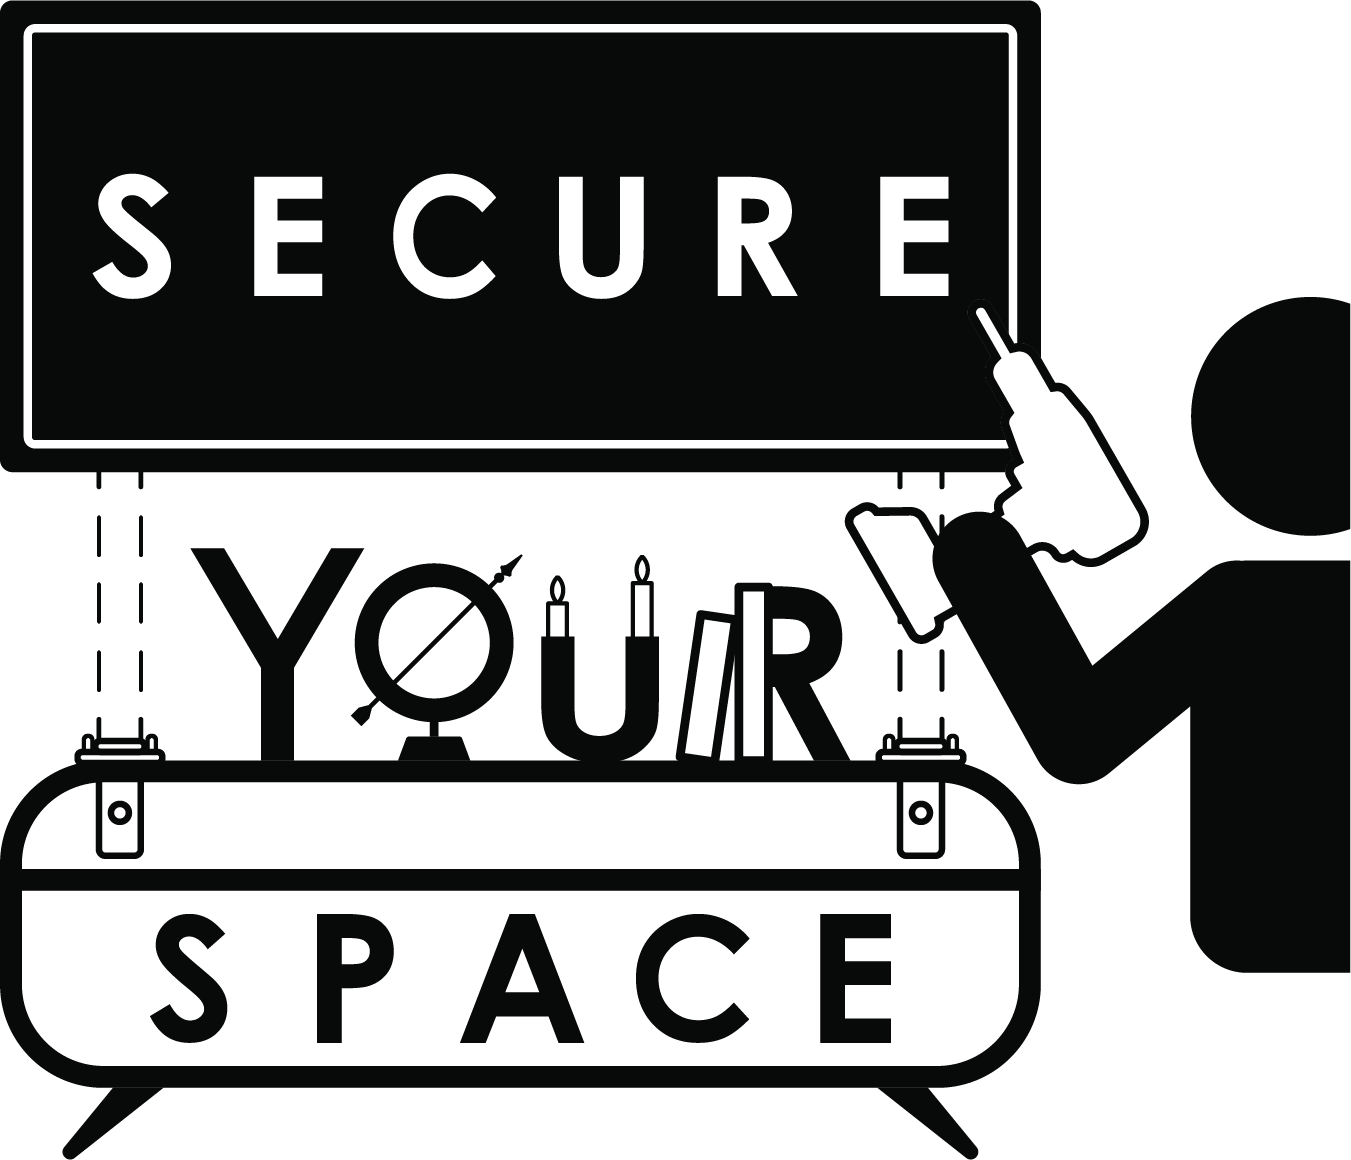 Secure Your Space logo in black and white